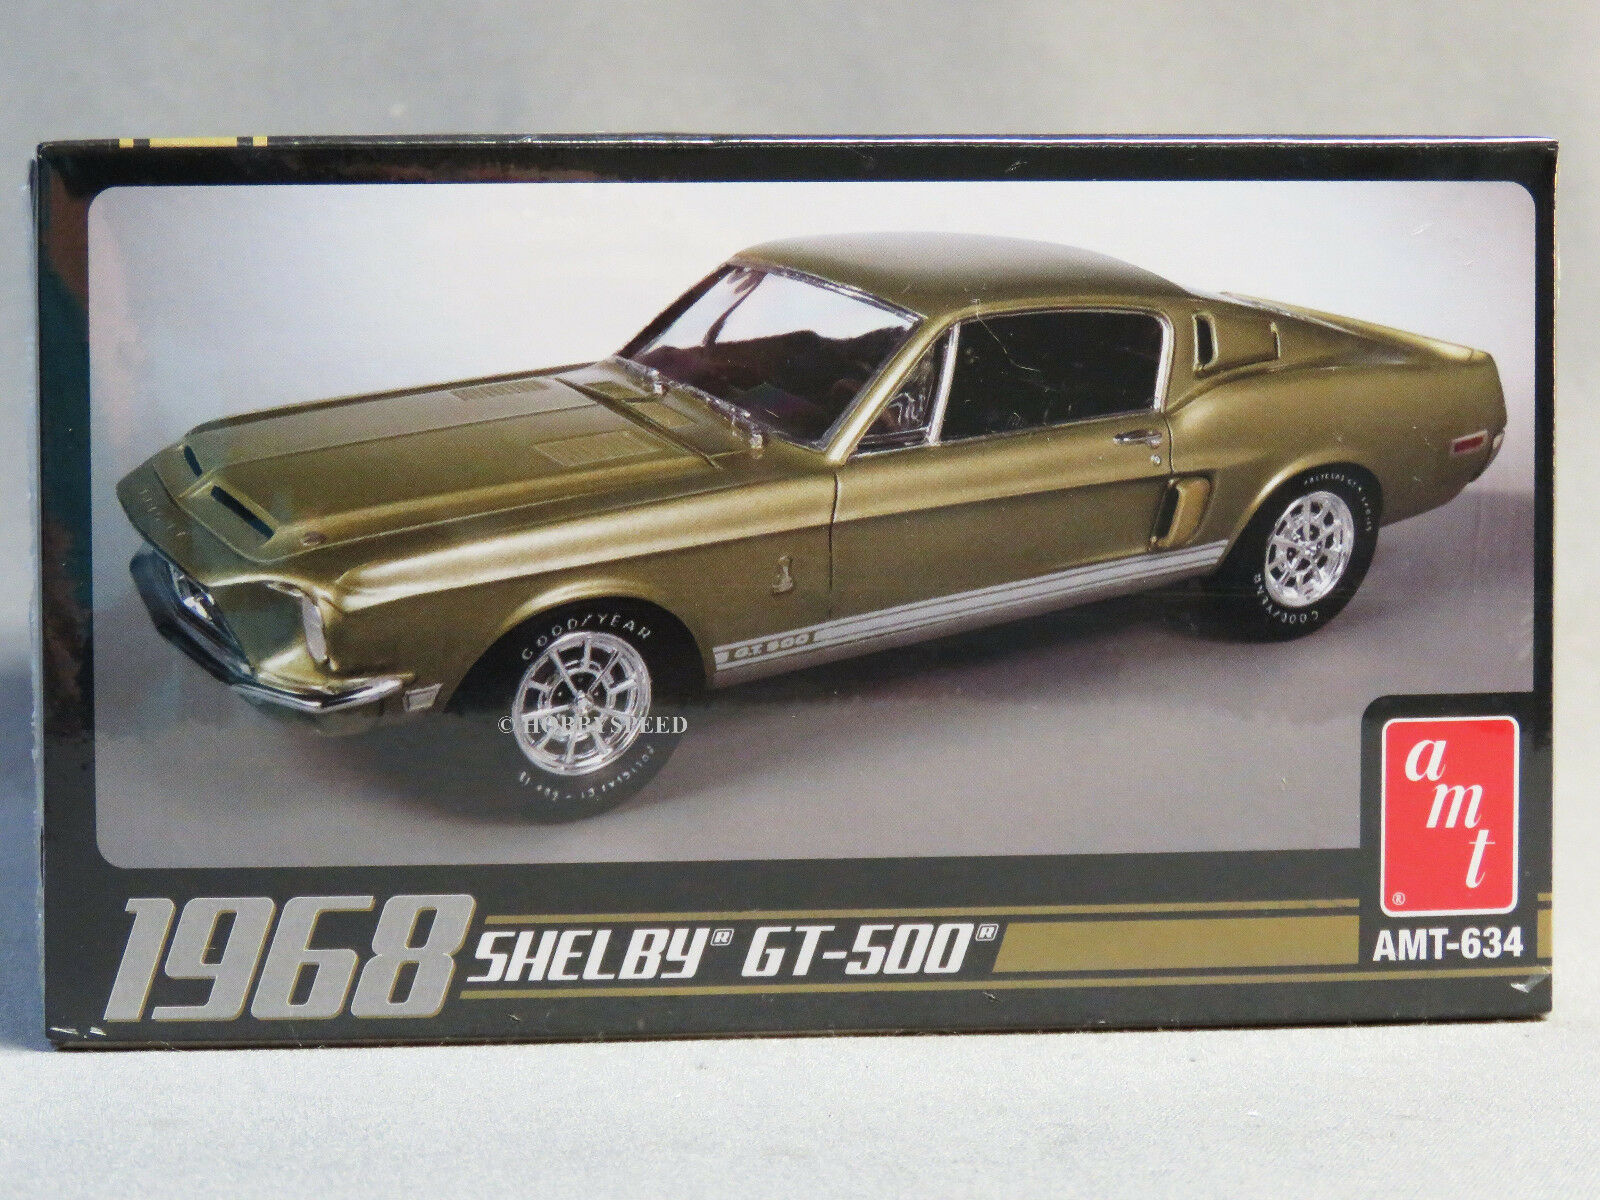 AMT 1968 SHELBY GT 500 MODEL CAR KIT 1/25 SCALE 634